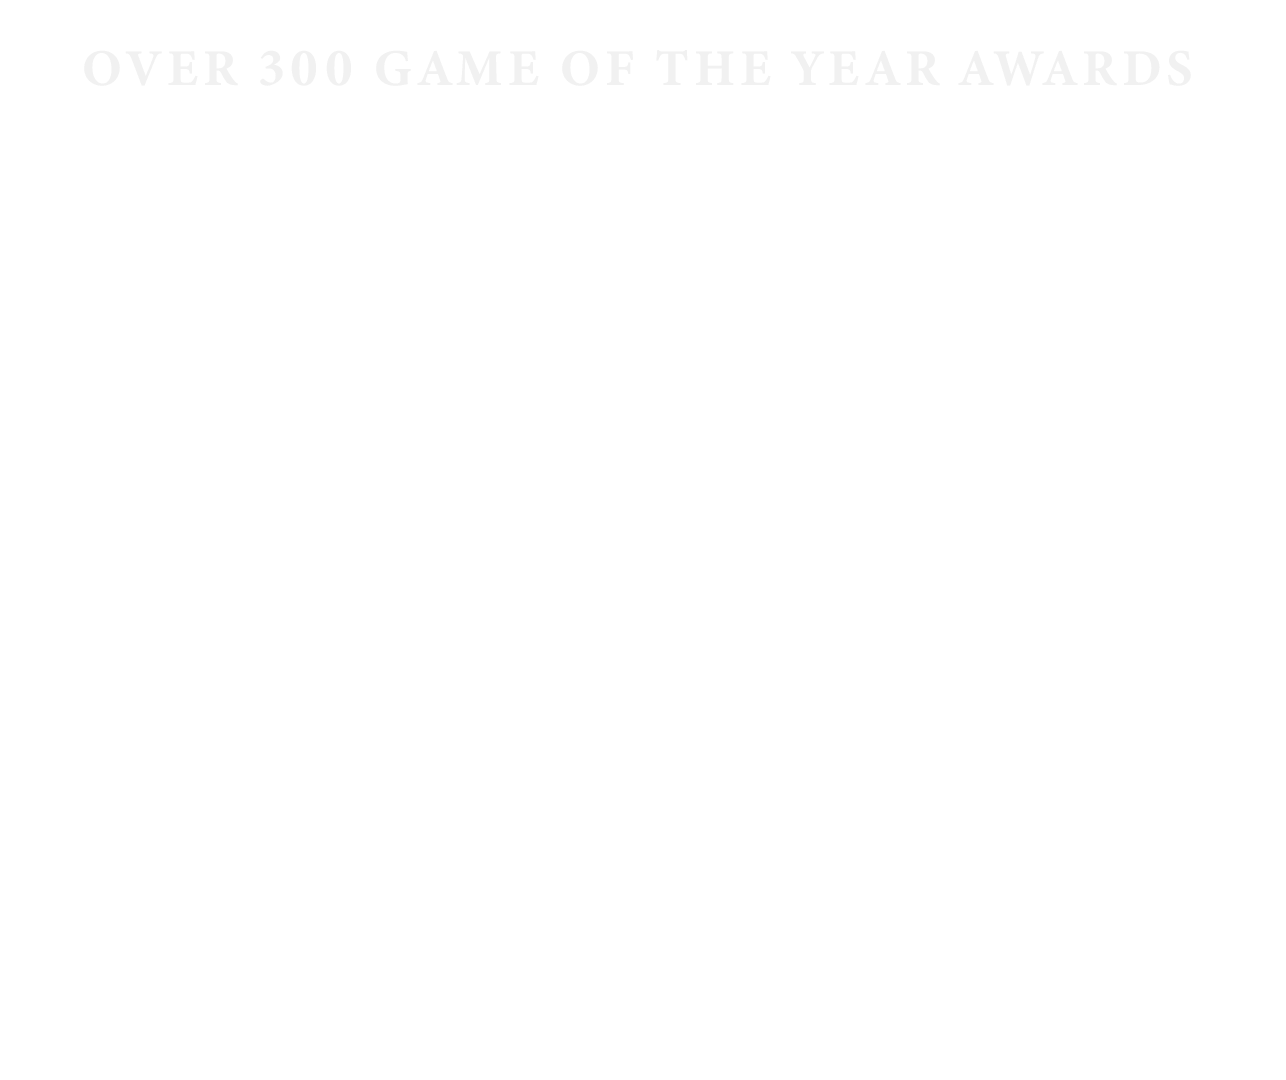 The Last of Us Part 2 Accolades